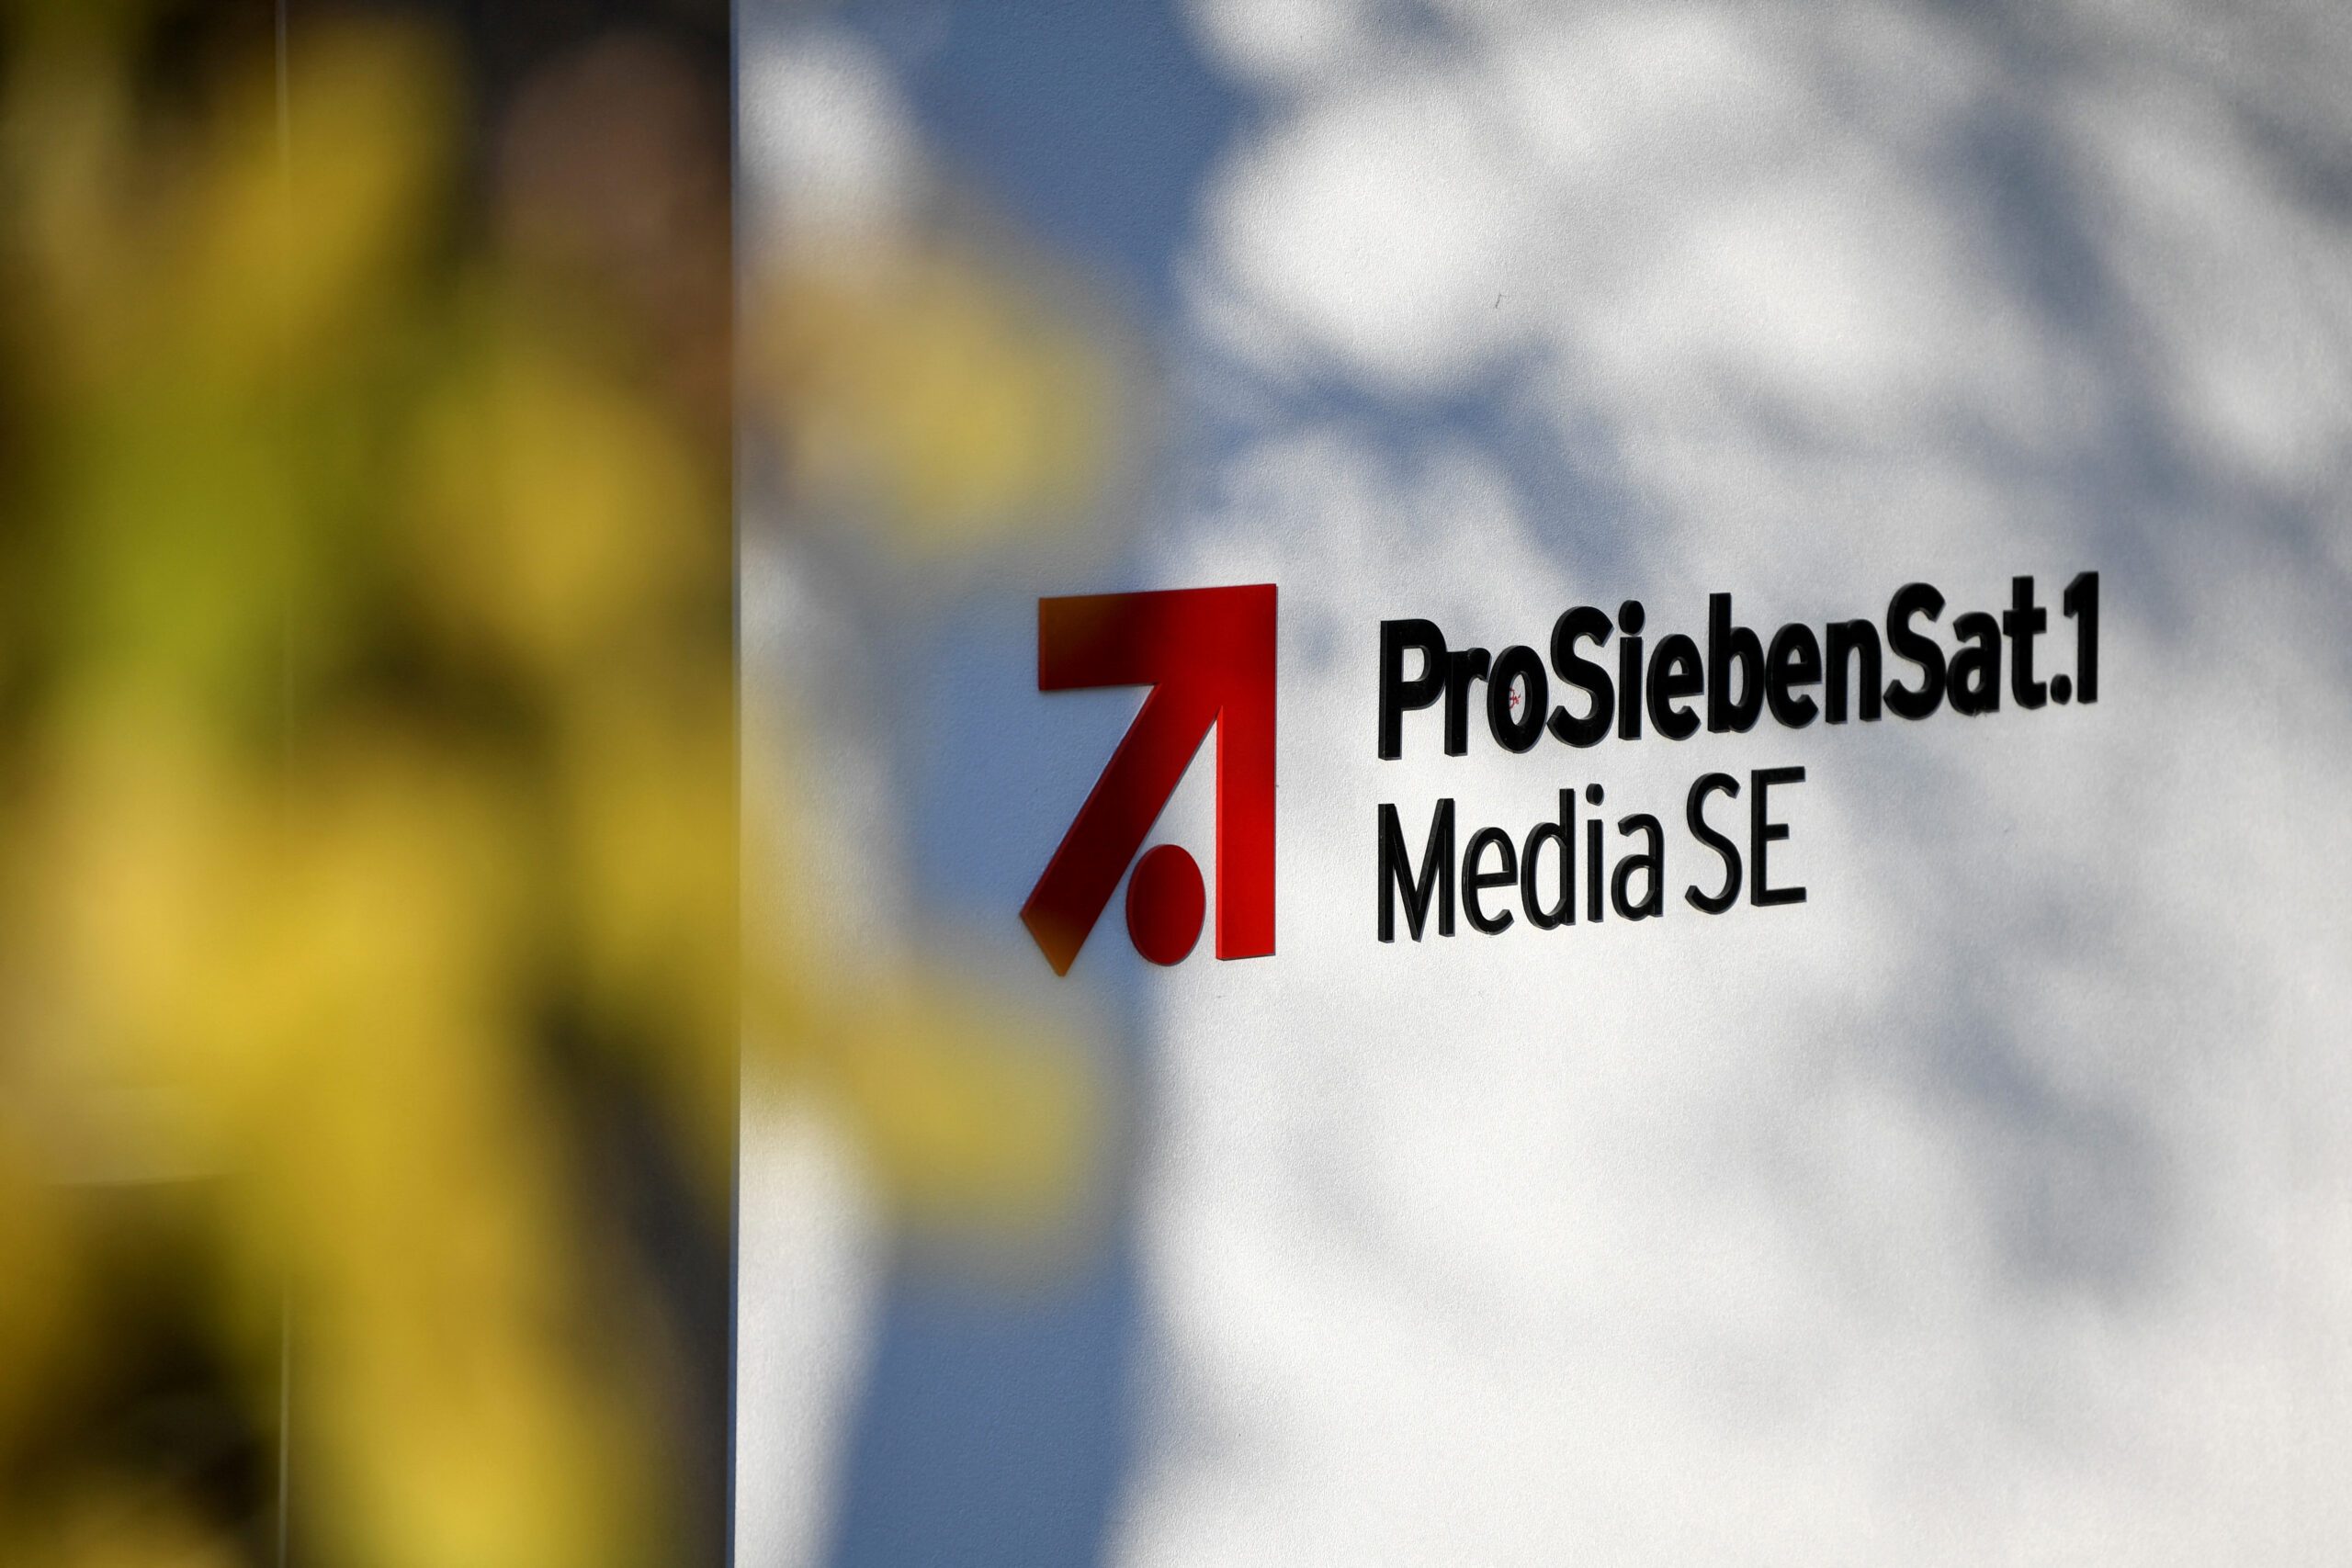 FILE PHOTO: The logo of German media company ProSiebenSat.1 is seen in front of the headquarters in Unterfoehring near Munich, Germany, November 5, 2020. REUTERS/Andreas Gebert/File Photo